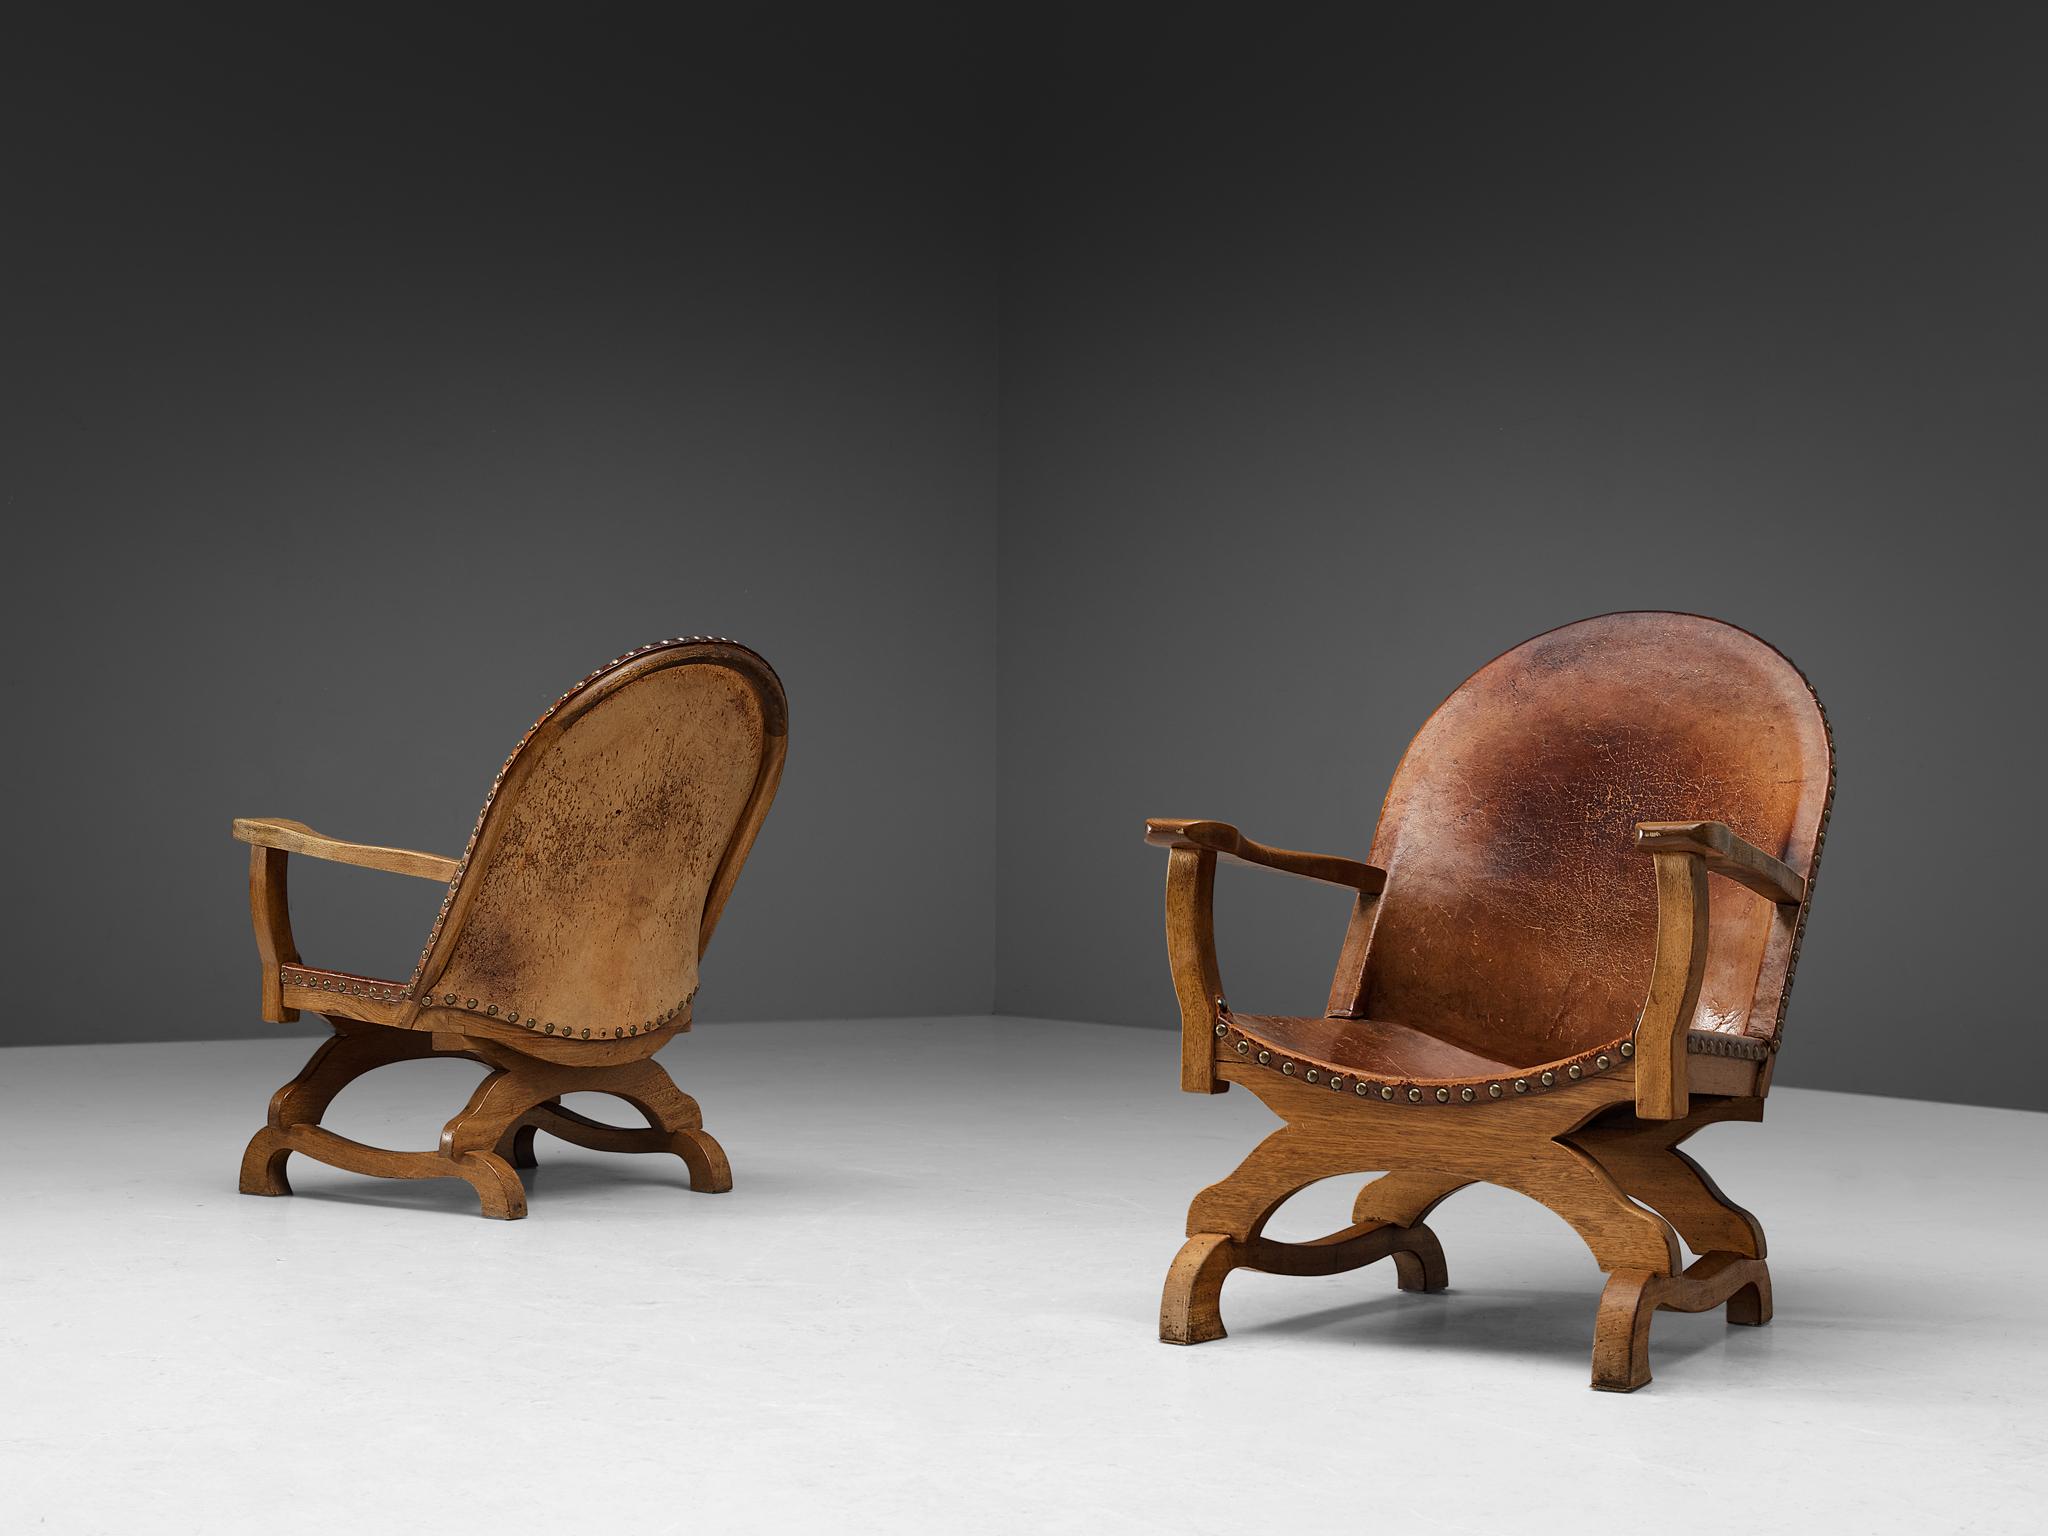 Pair of lounge chairs, leather, brass, oak, Spain, 1960s.

These lounge chairs originate from Spain and stylistically refer to the late 19th century Revival period. The construction of the base resembles the chair known in Spanish as 